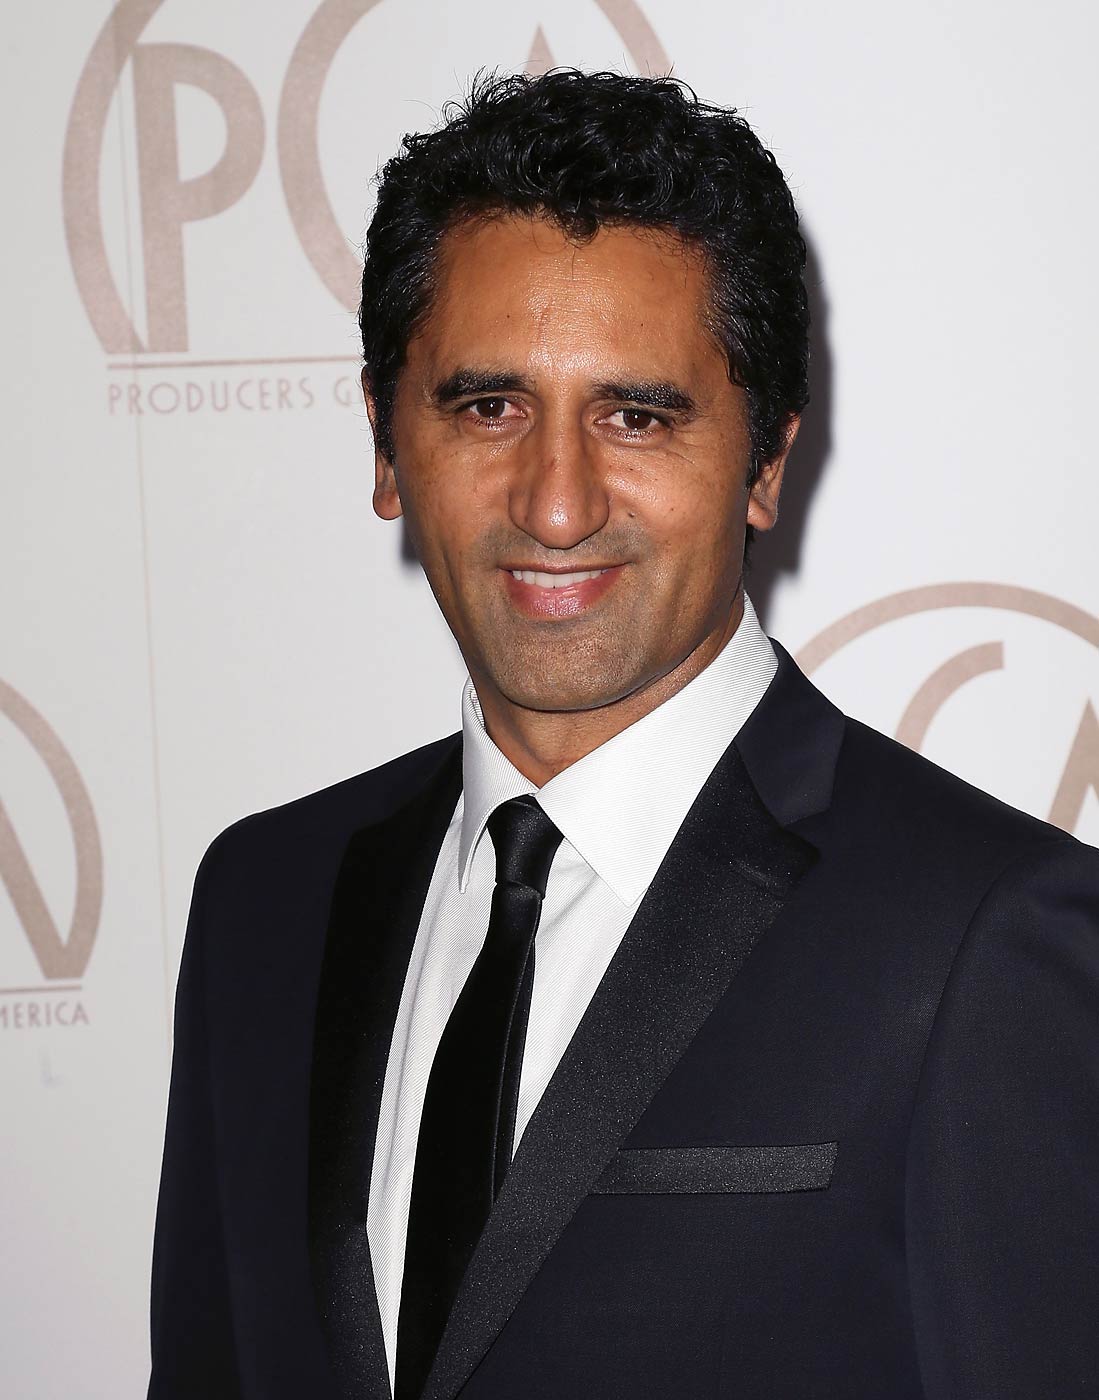 Cliff Curtis attends the 26th Annual Producers Guild of America Awards at the Hyatt Regency Century Plaza on Jan. 24, 2015 in Los Angeles, Calif. (David Livingston—Getty Images)